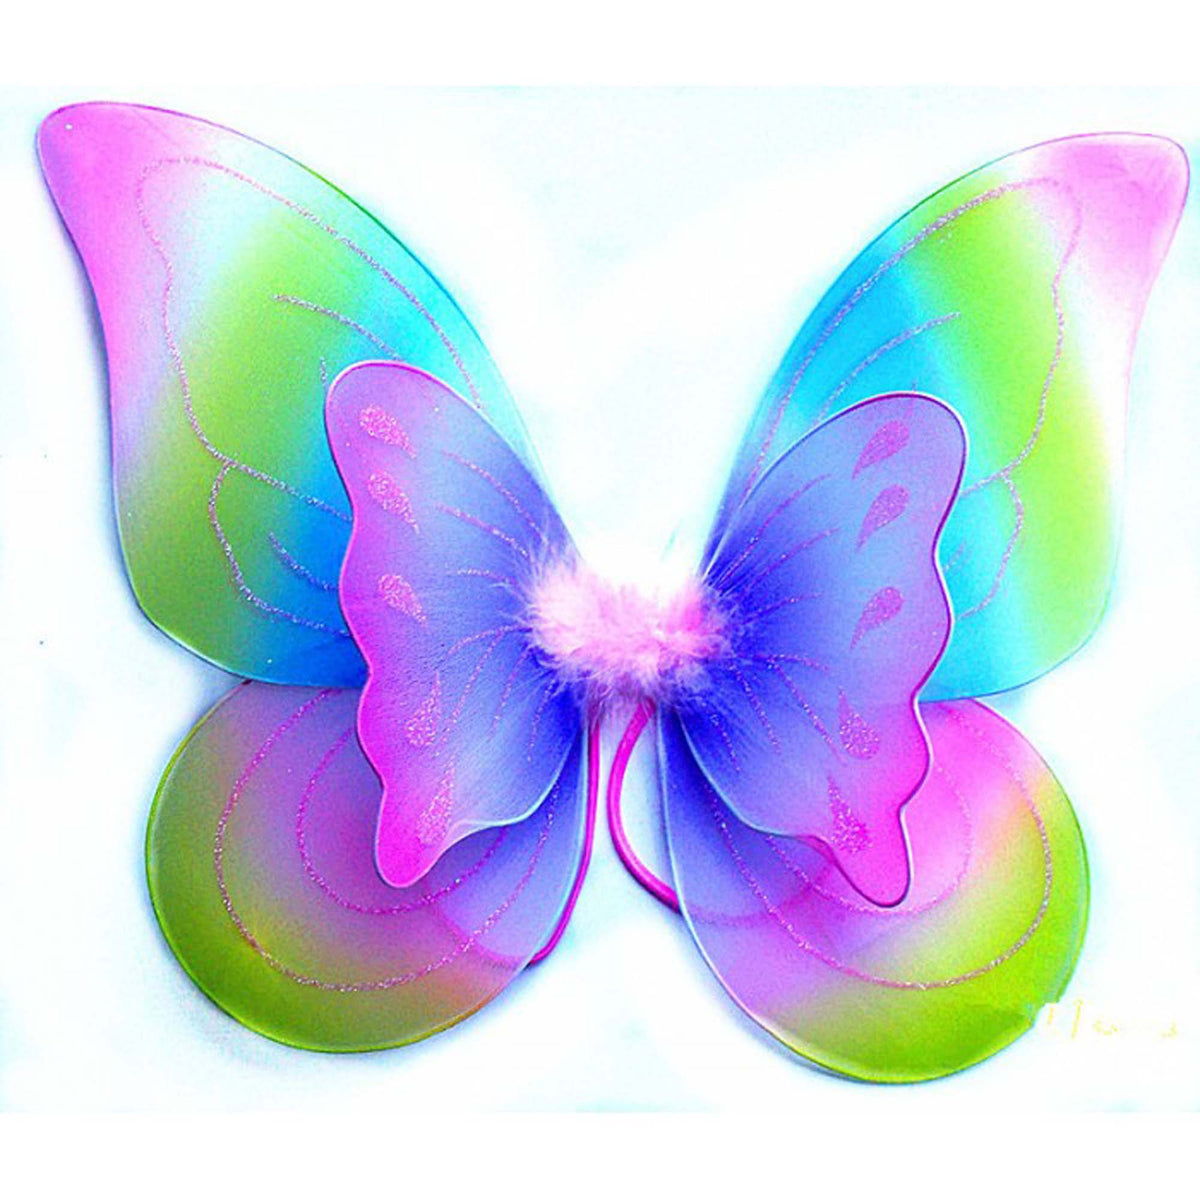 IVY TRADING INC. Costume Accessories Rainbow Double Layer Wings, 20 Inches, 1 Count 8336572310509